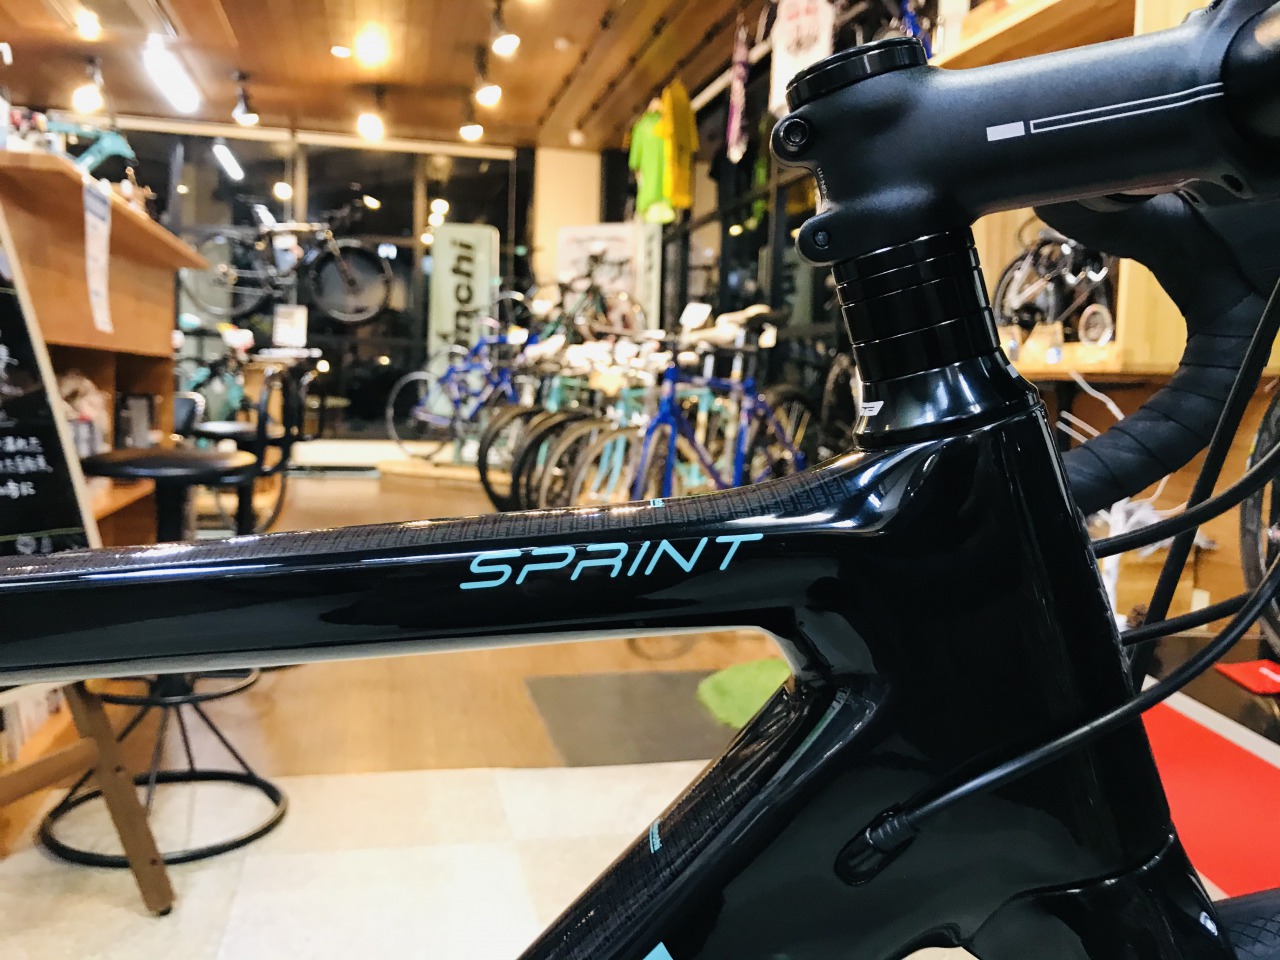 Bianchi SPRINT DISC納車しました！From Kさま | Climb cycle sports